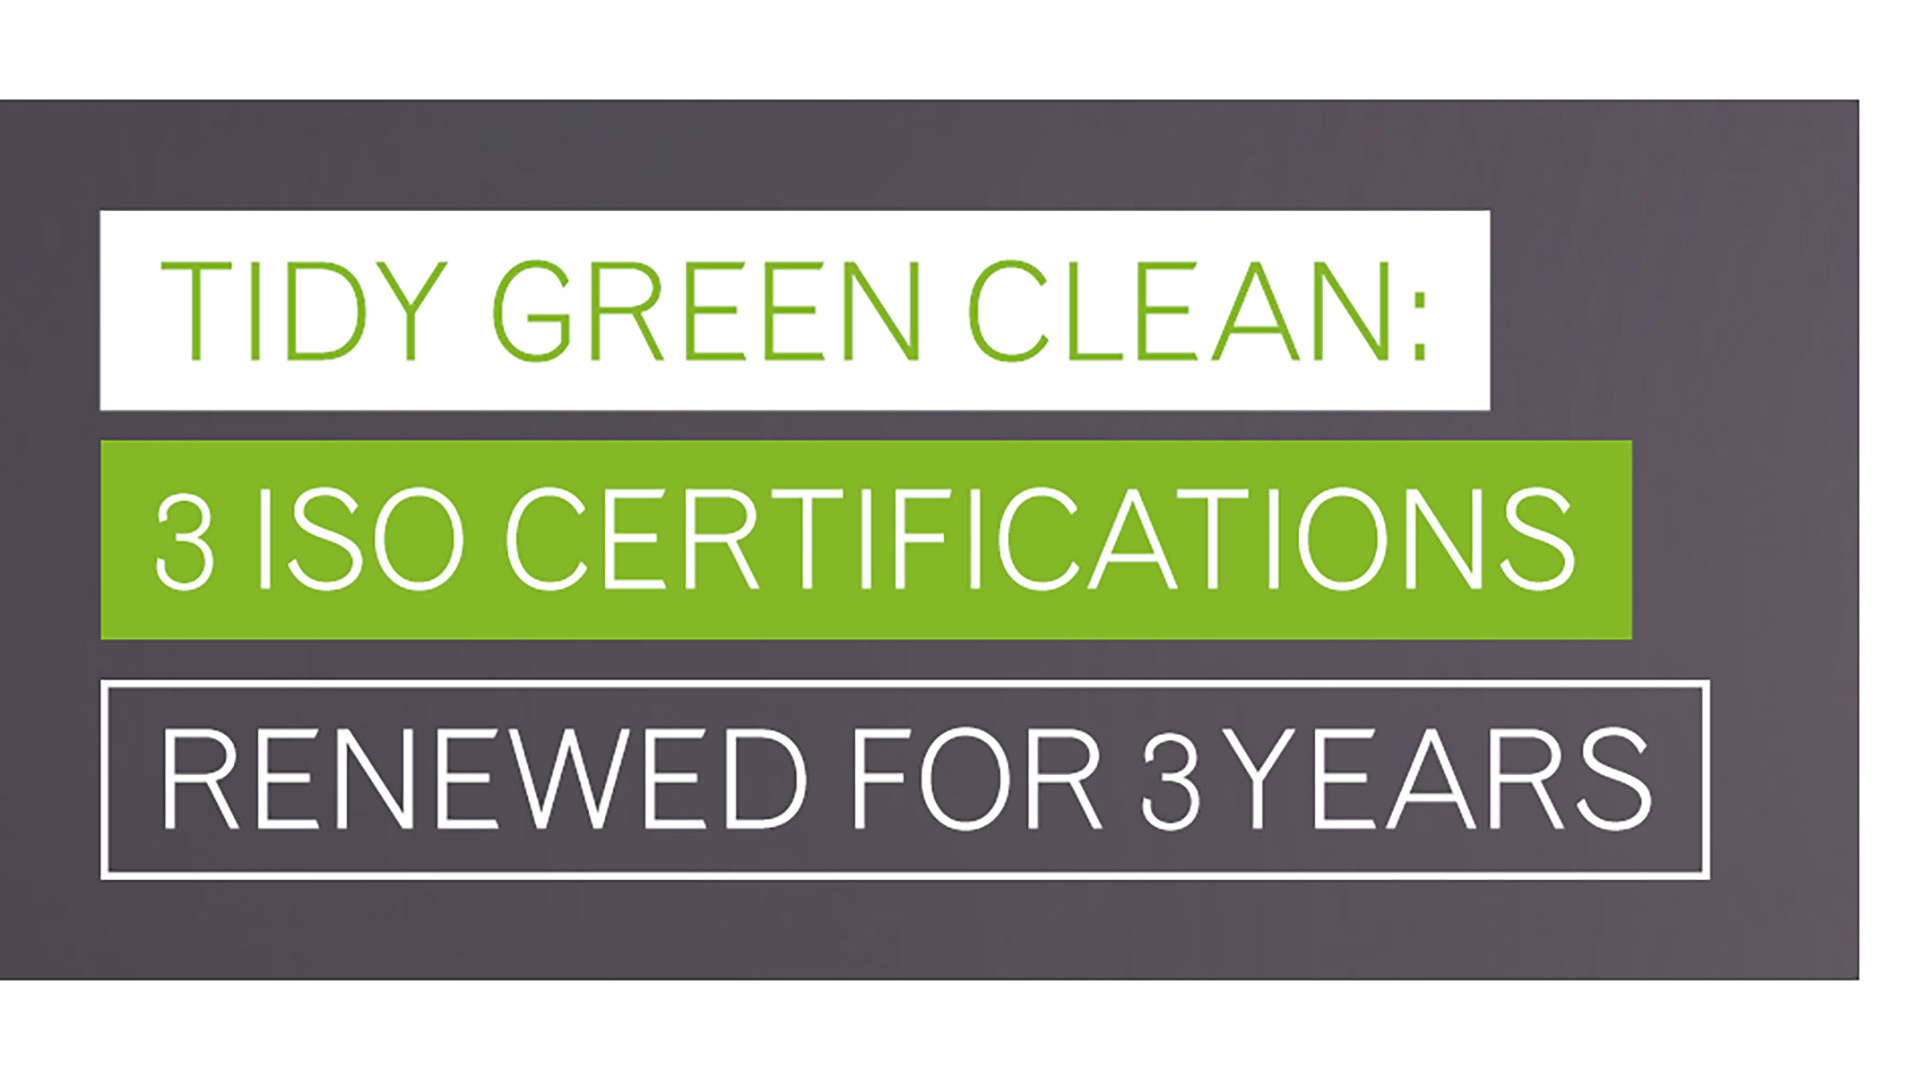 Tidy Green Clean: 3 ISO Certifications renewed for 3 years